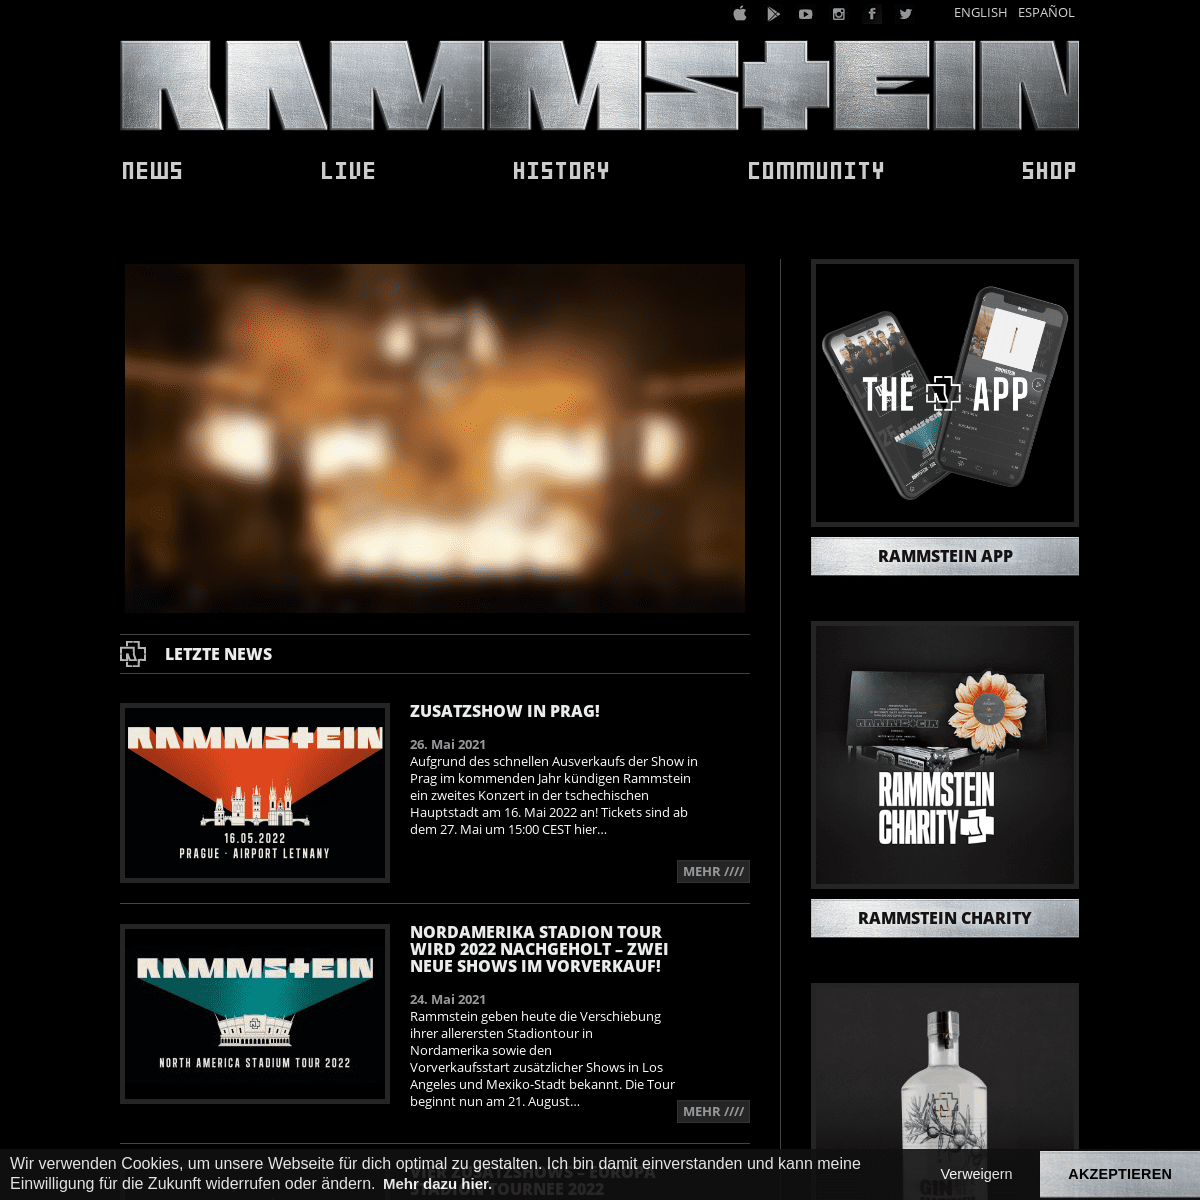 A complete backup of https://rammstein.com